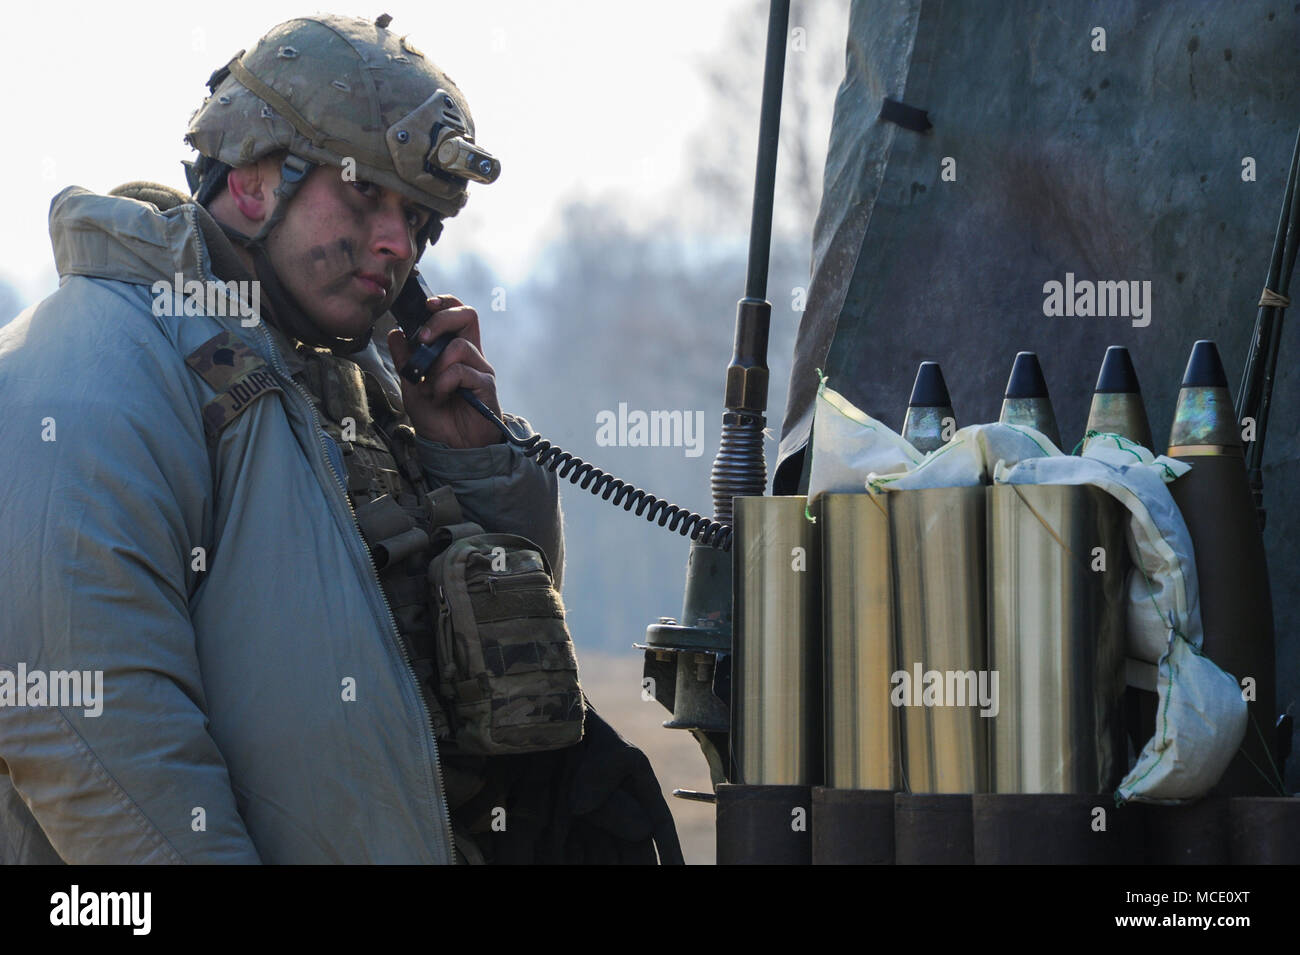 U.S. Army Spc. Tyler Jouret, assigned to Battery A, 4th Battalion, 319th Airborne Field Artillery Regiment, 173rd Airborne Brigade, operates a radio during a live fire exercise as part of exercise 'Bayonet Sphinx' at the 7th Army Training Command's Grafenwoehr Training Area, Germany, Feb. 27, 2018.  (U.S. Army photo by Markus Rauchenberger) Stock Photo